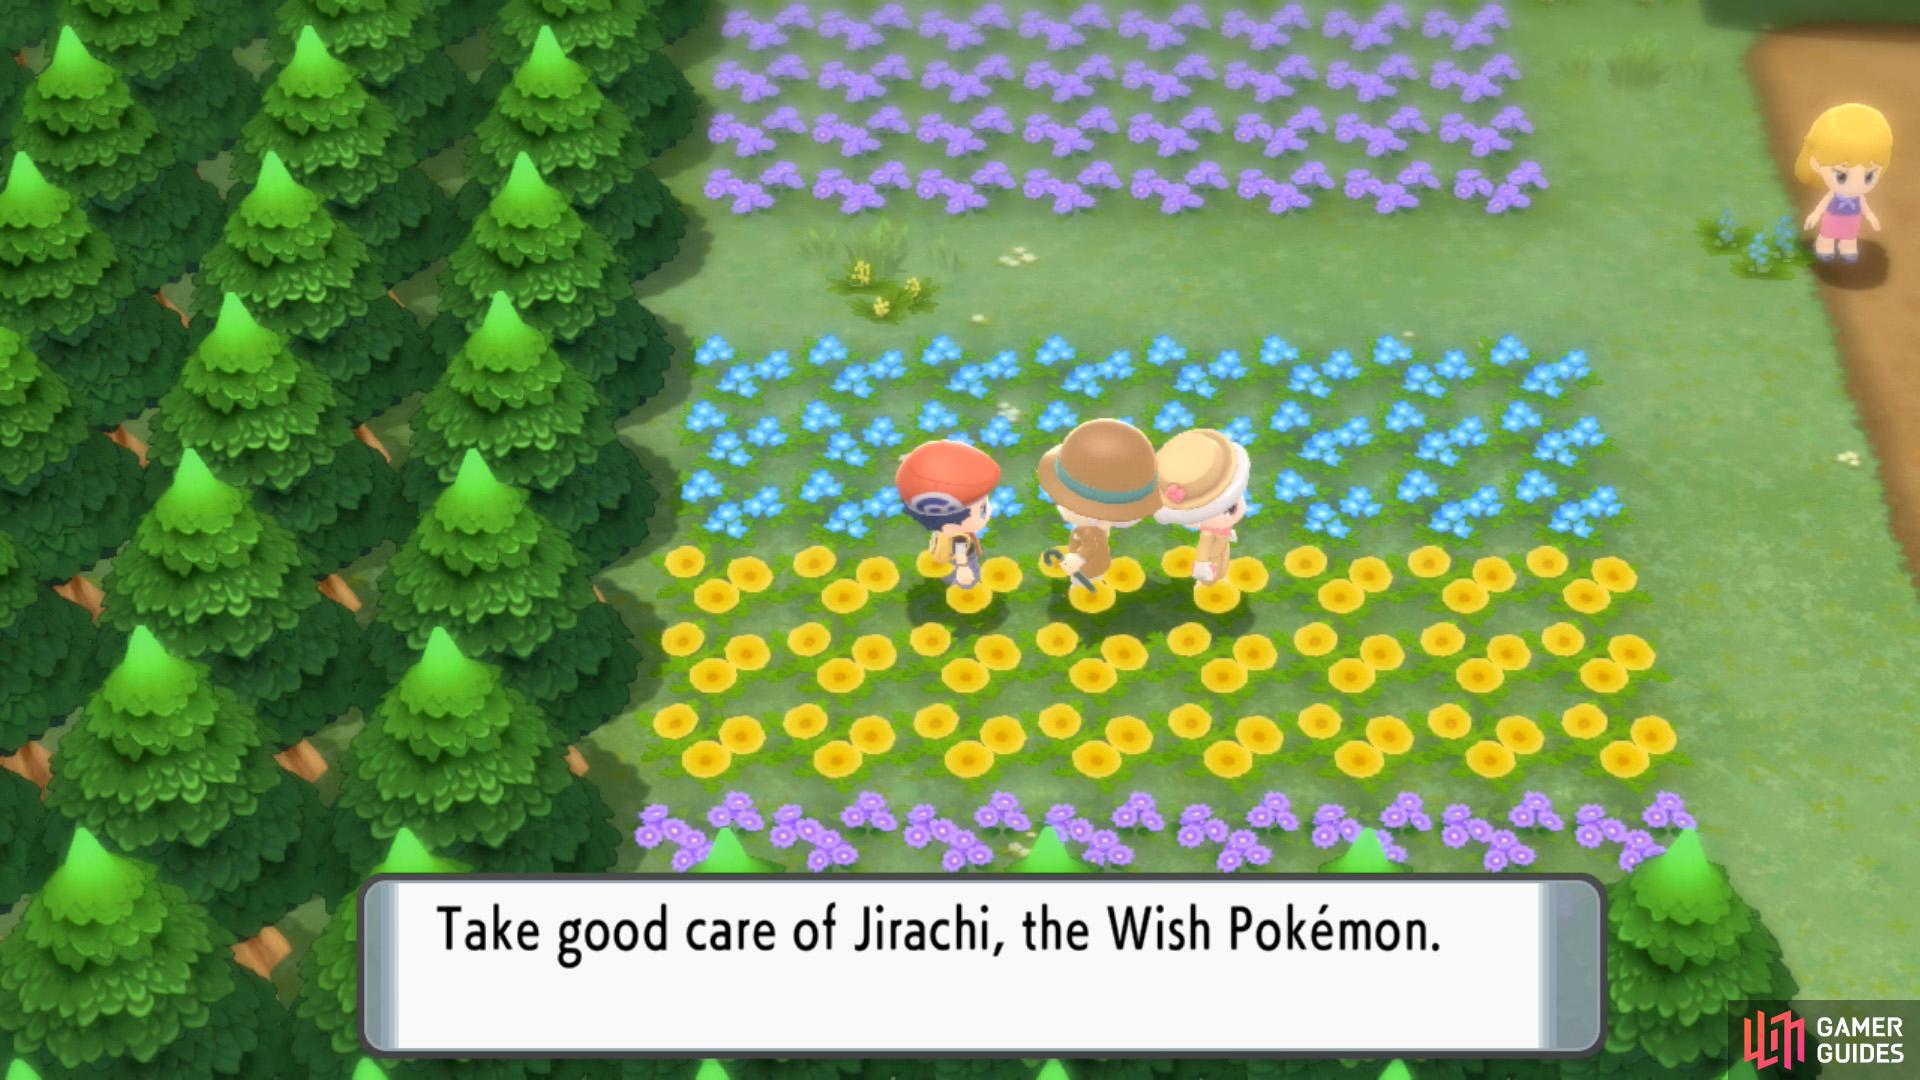 This nice fella will give you Jirachi, a Mythical Pokémon from the Hoenn region.